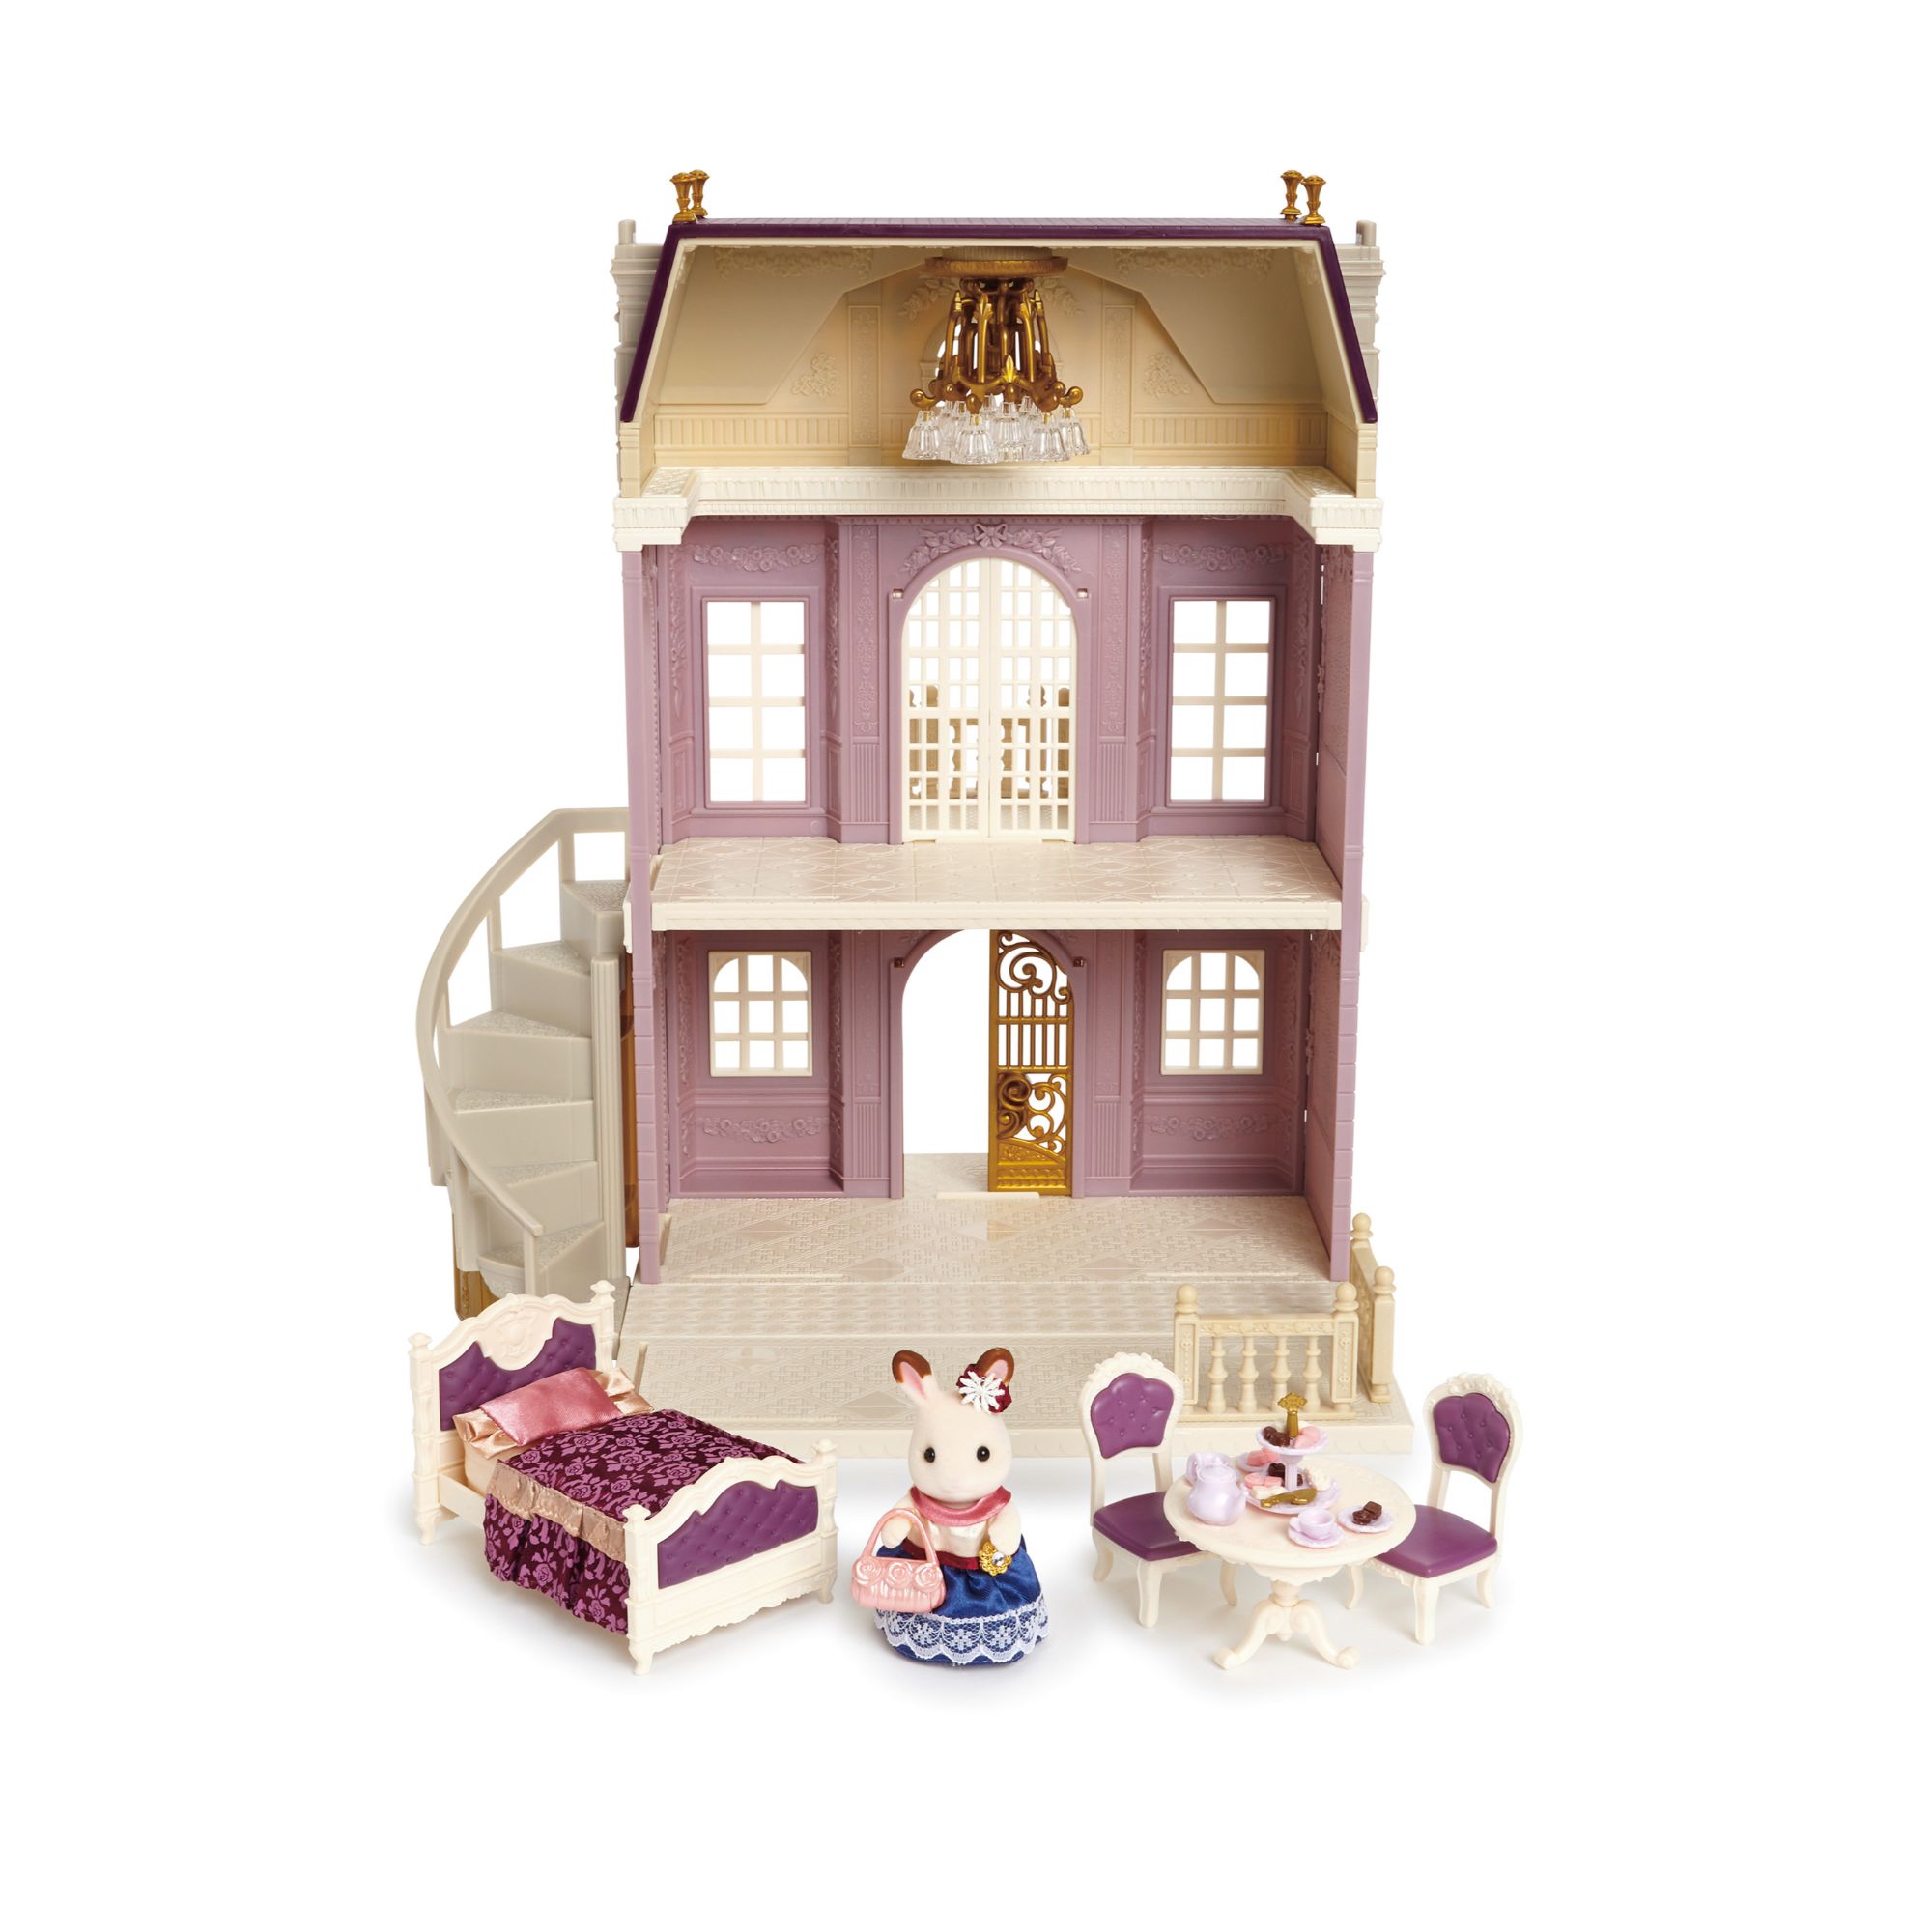 36-Pieces Calico Critters Elegant Town Manor Playhouse Gift Set $29.50 + Free Shipping w/ Walmart+ or Orders $35+